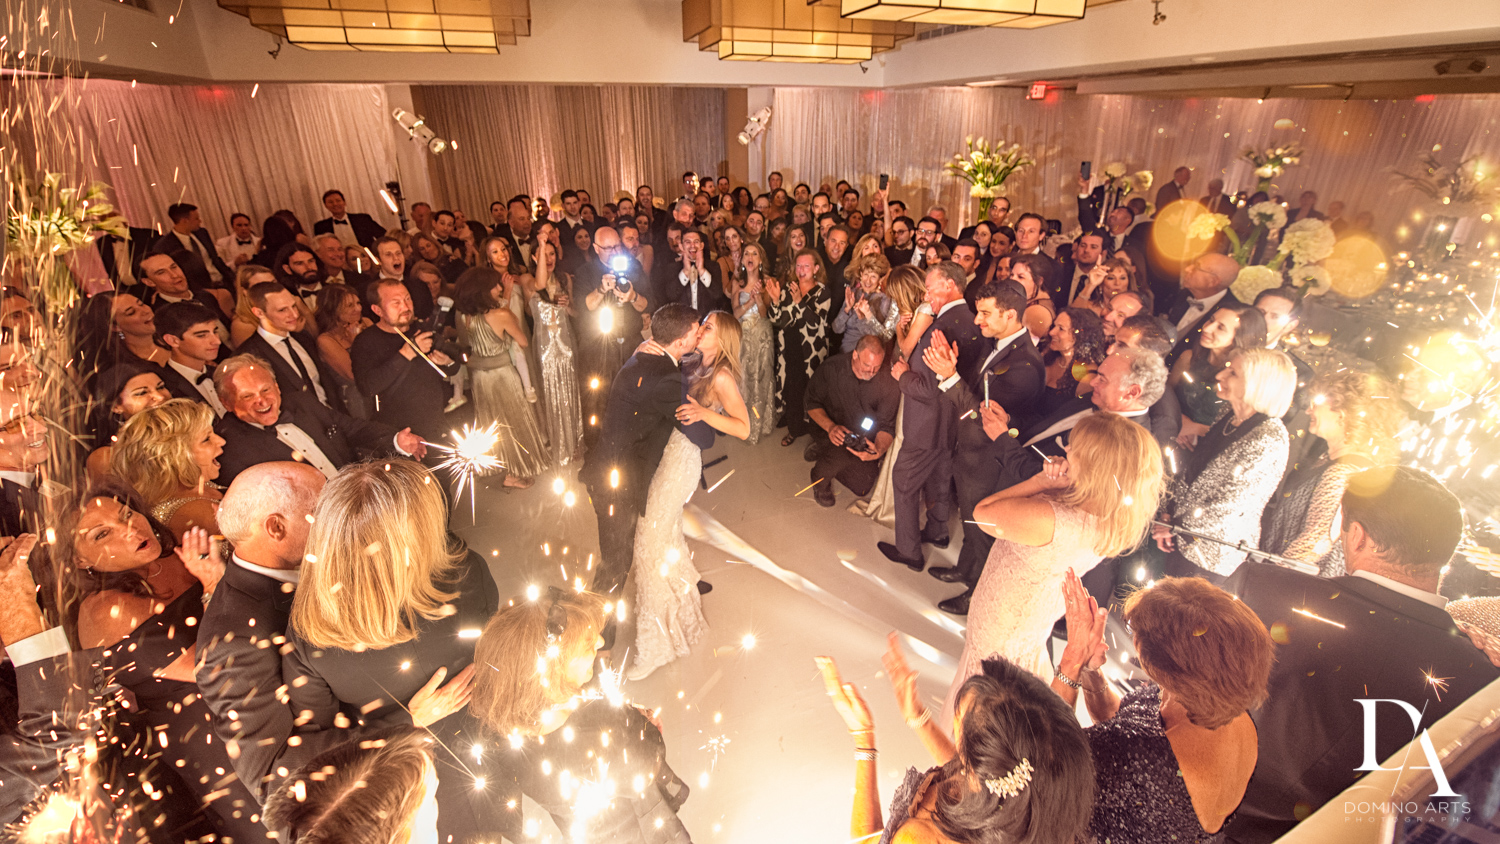 sparklers at Wedding at Boca Rio Golf Club by Domino Arts Photography